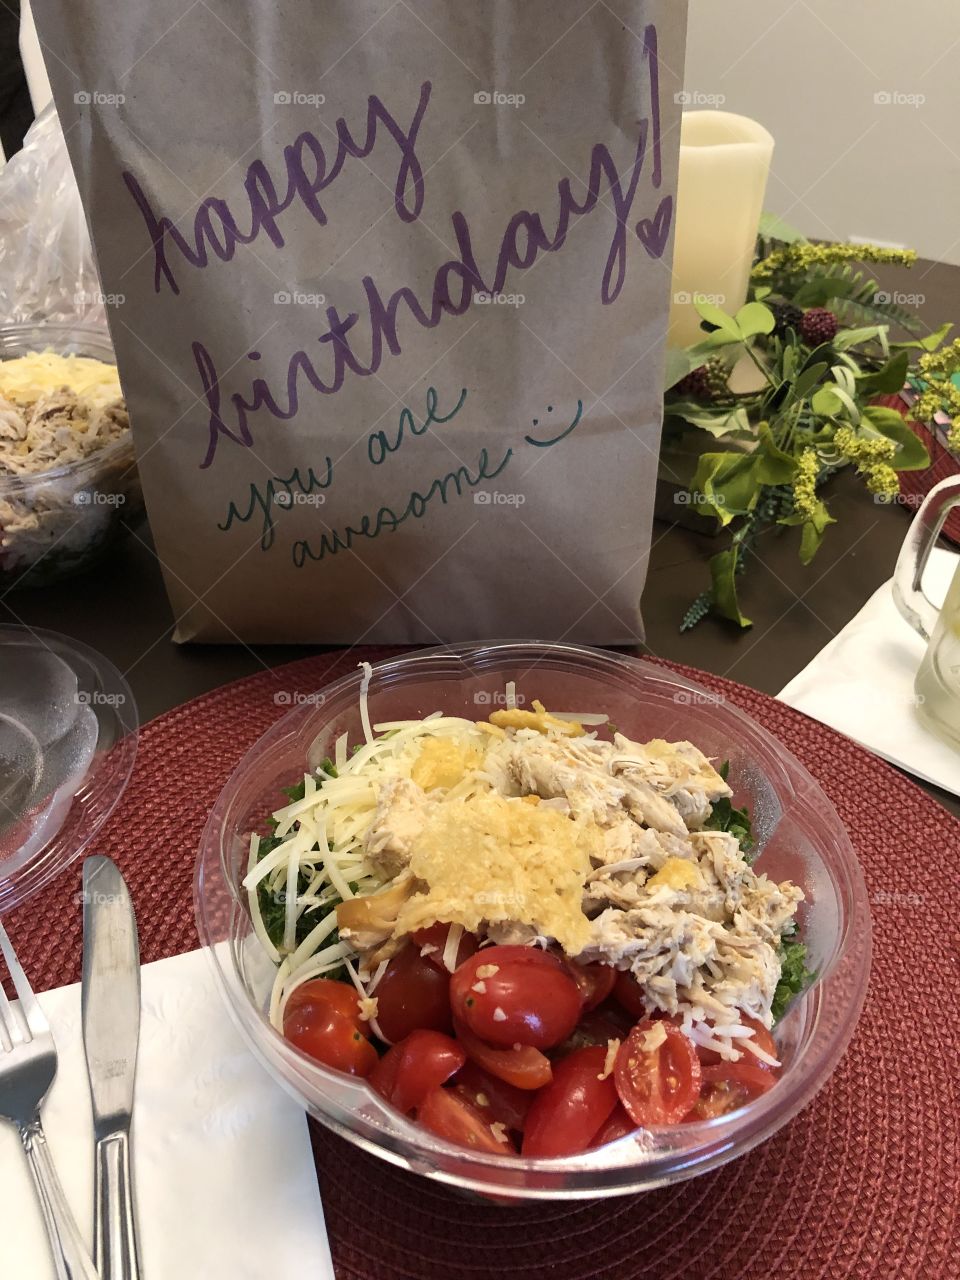 Organic salad kale chicken tomatoes Parmesan birthday takeout lunch 